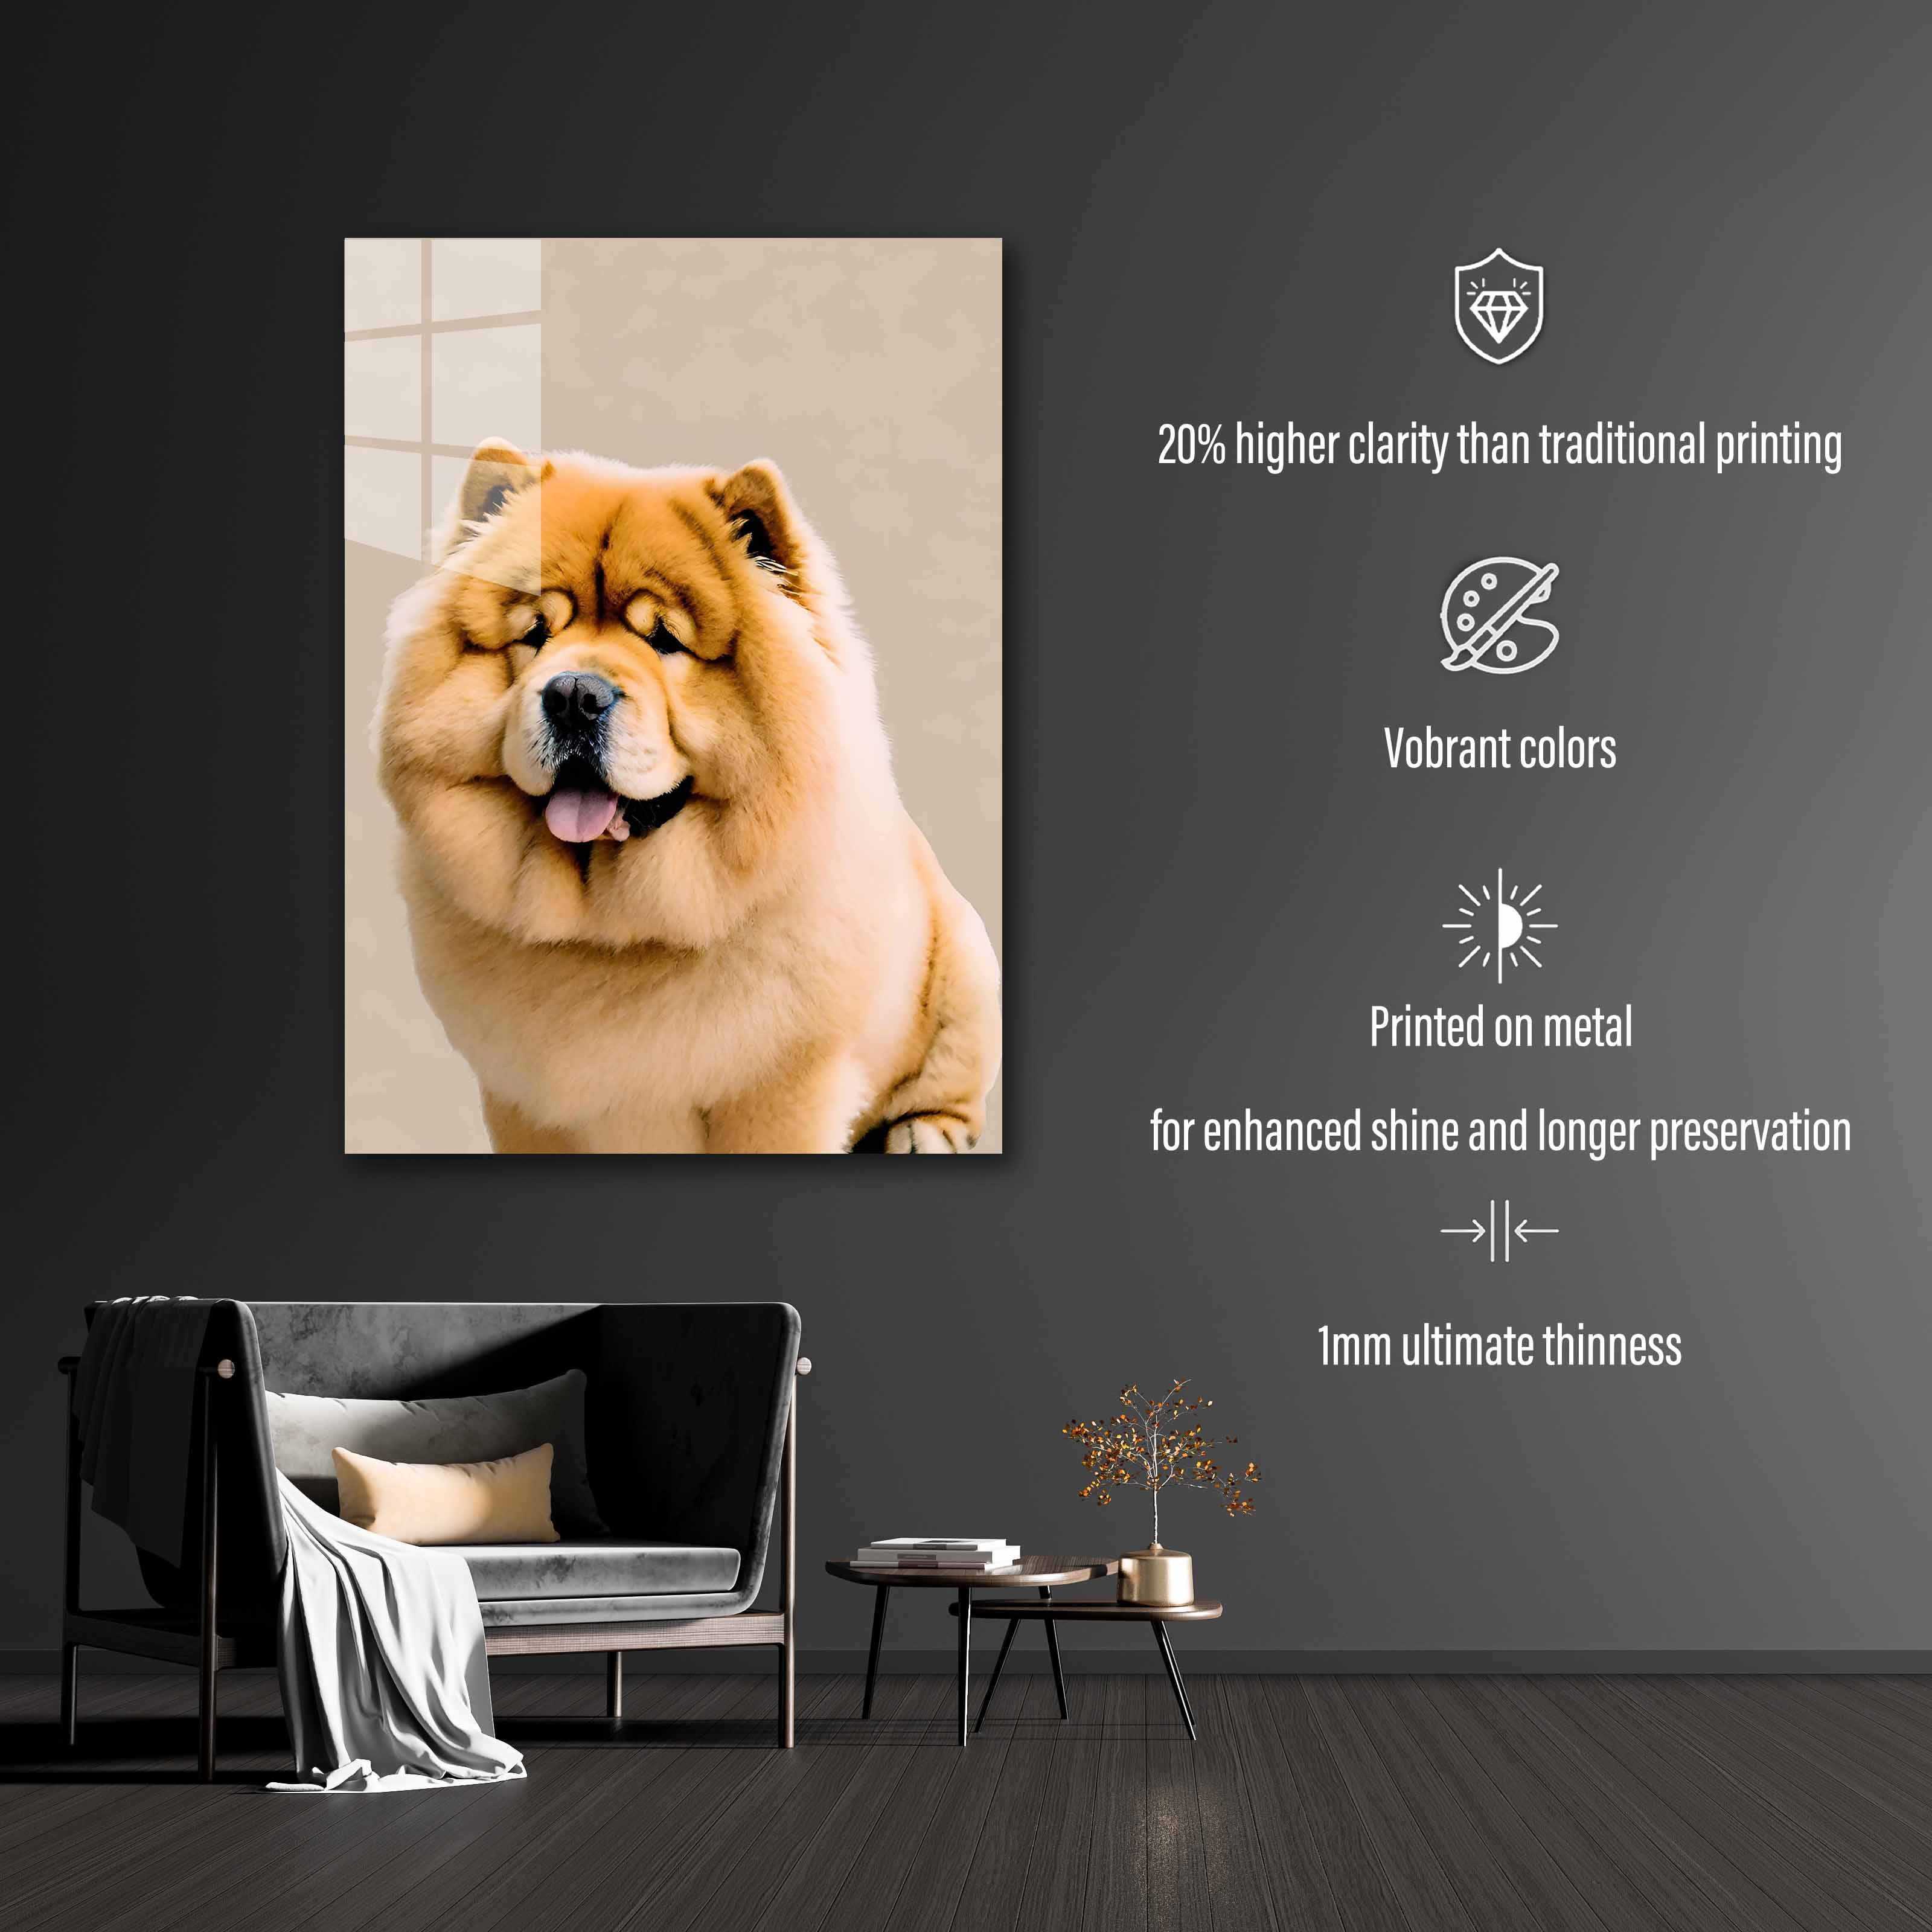 Chow Chow Pet-designed by @DynCreative